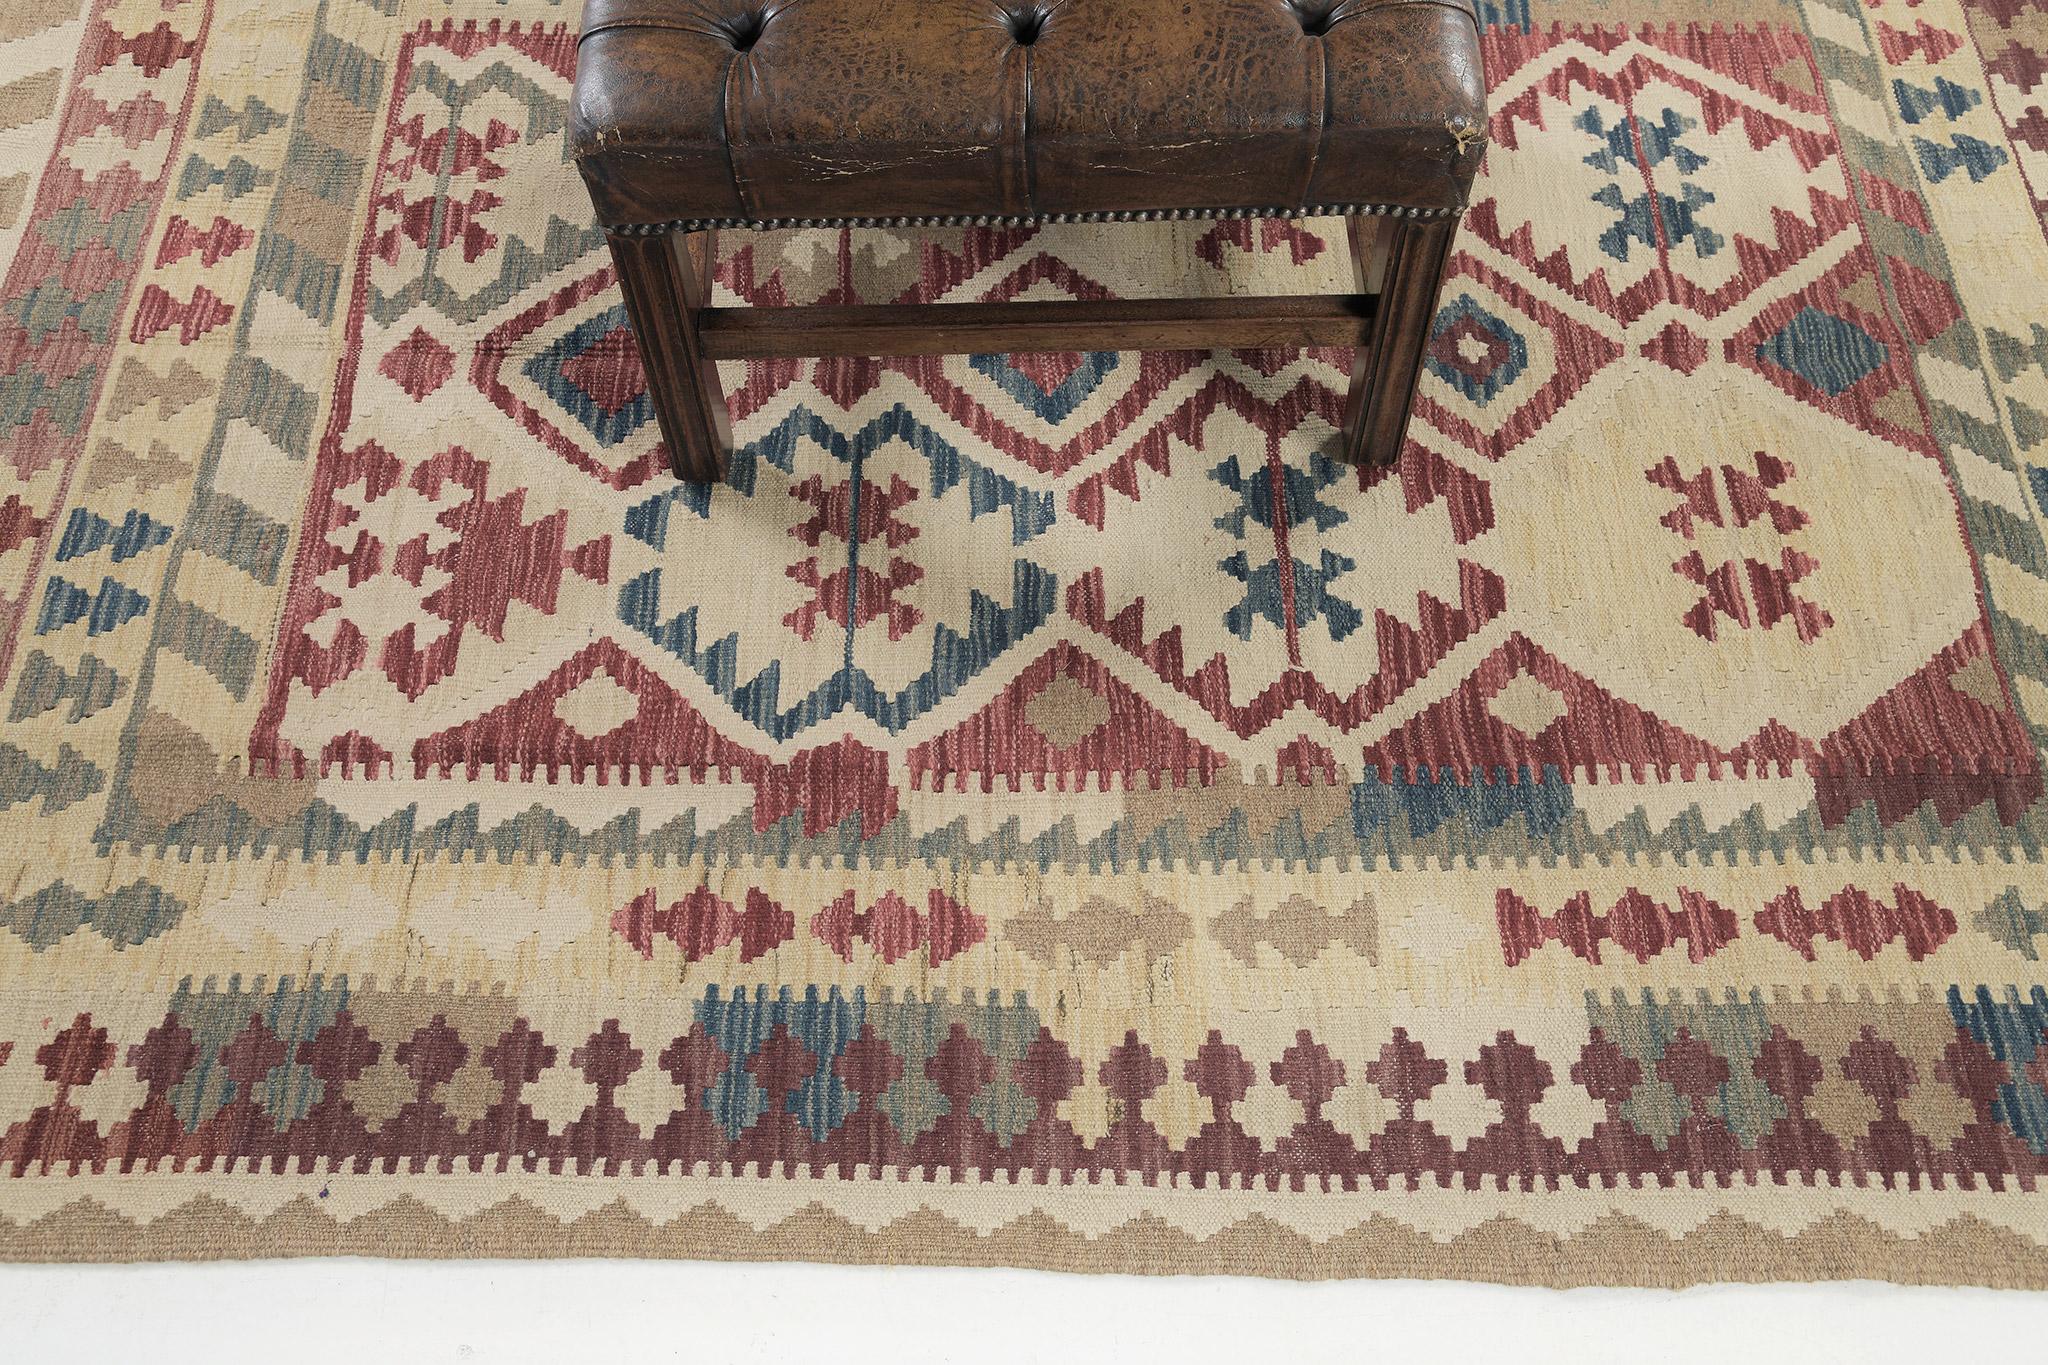 This remarkable flatweave Kilim is an excellent choice for your floors. It is not just for aesthetic value, but, to keep you on fashion as well. It features an all-over design of tribal motifs over dazzling multicolored wool. A beautiful hand-woven